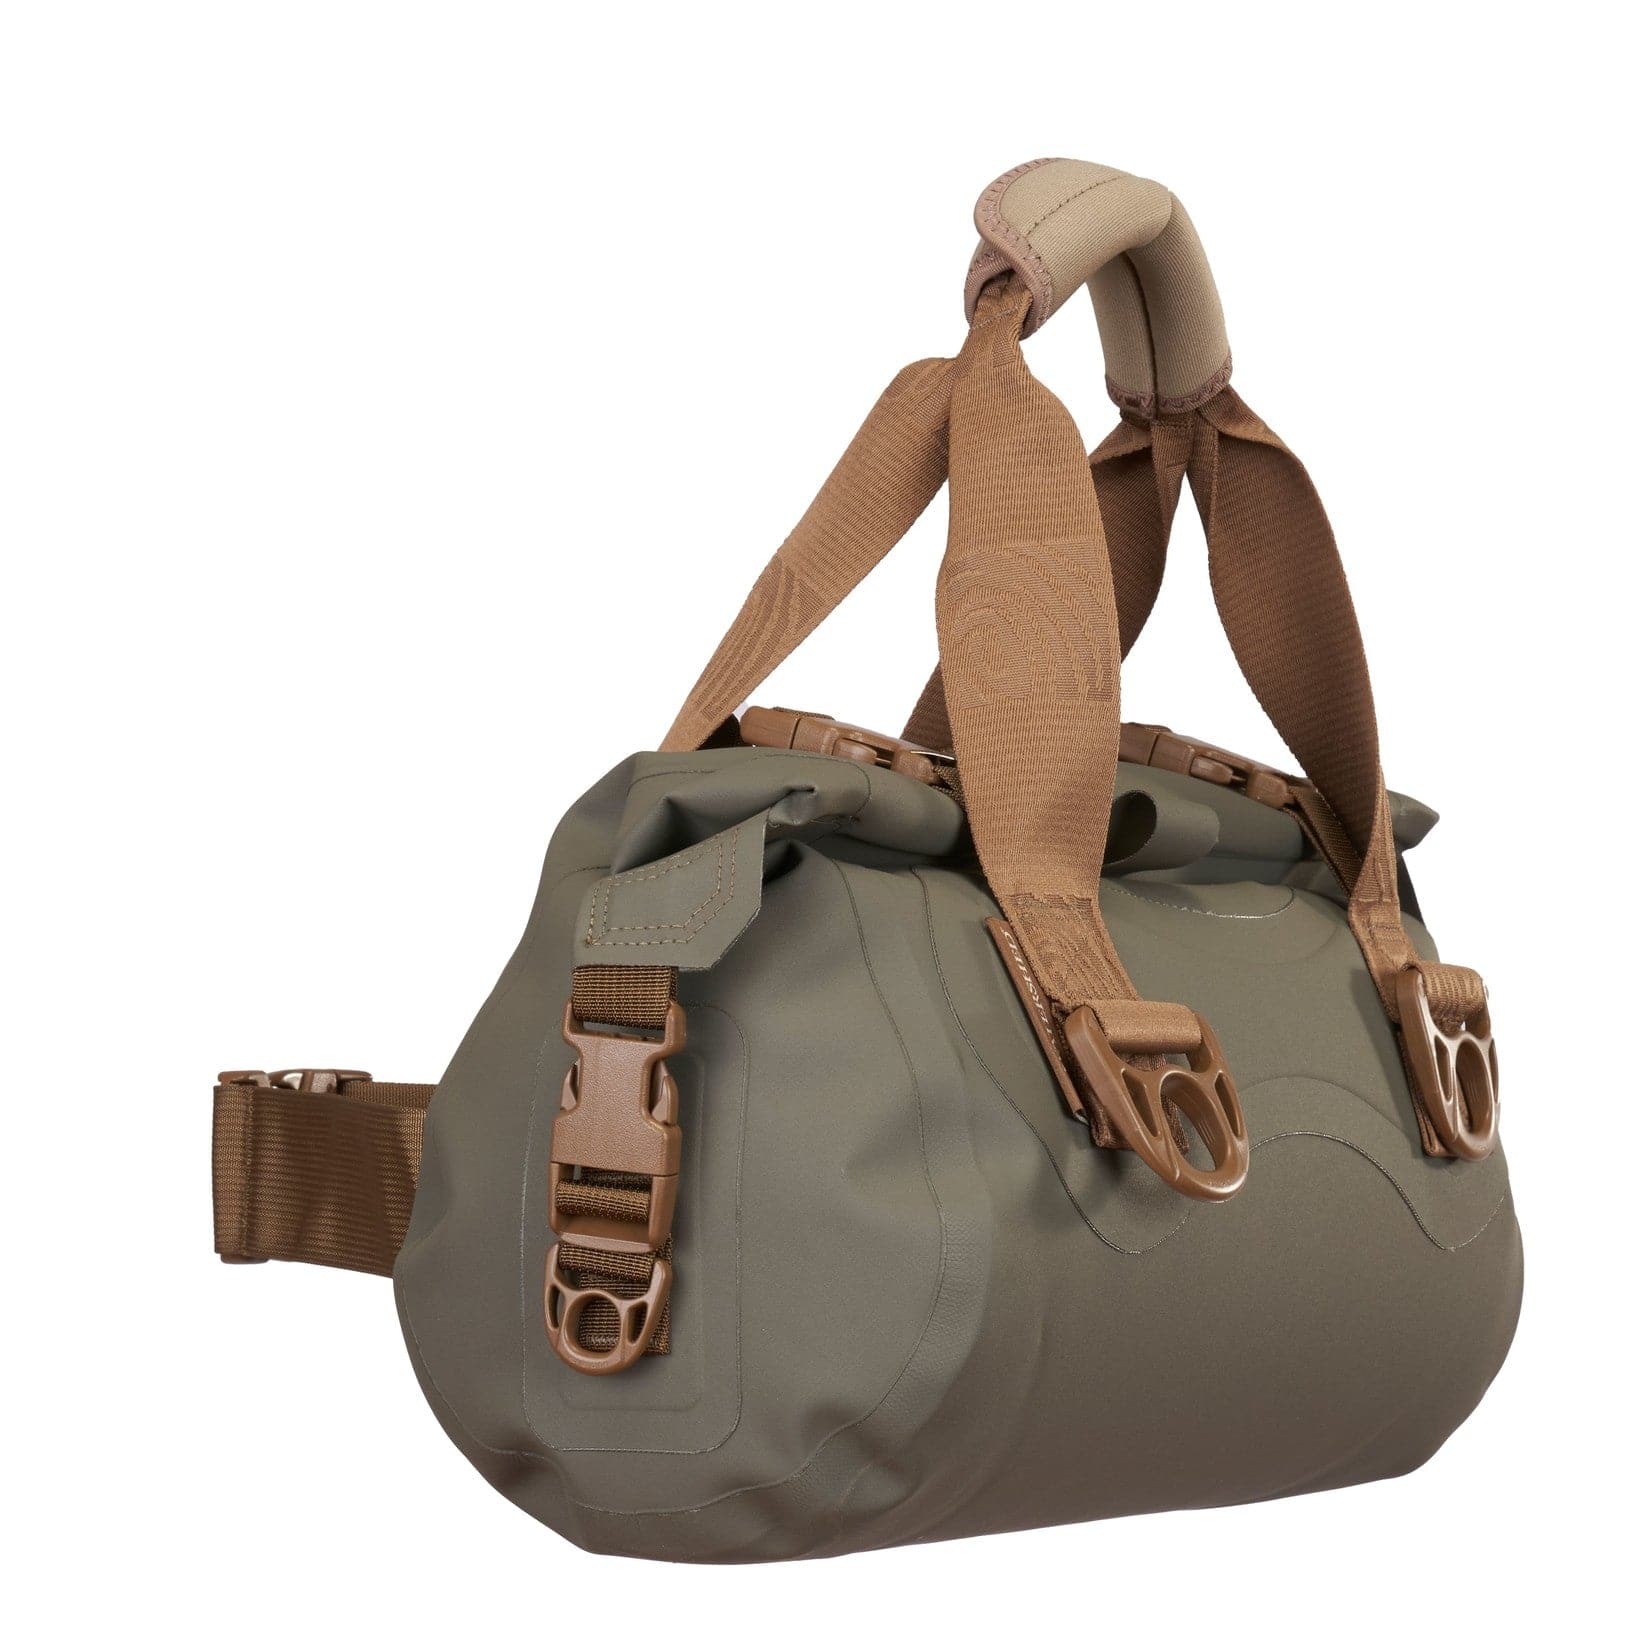 A large Watershed Goforth Duffel with straps on it.